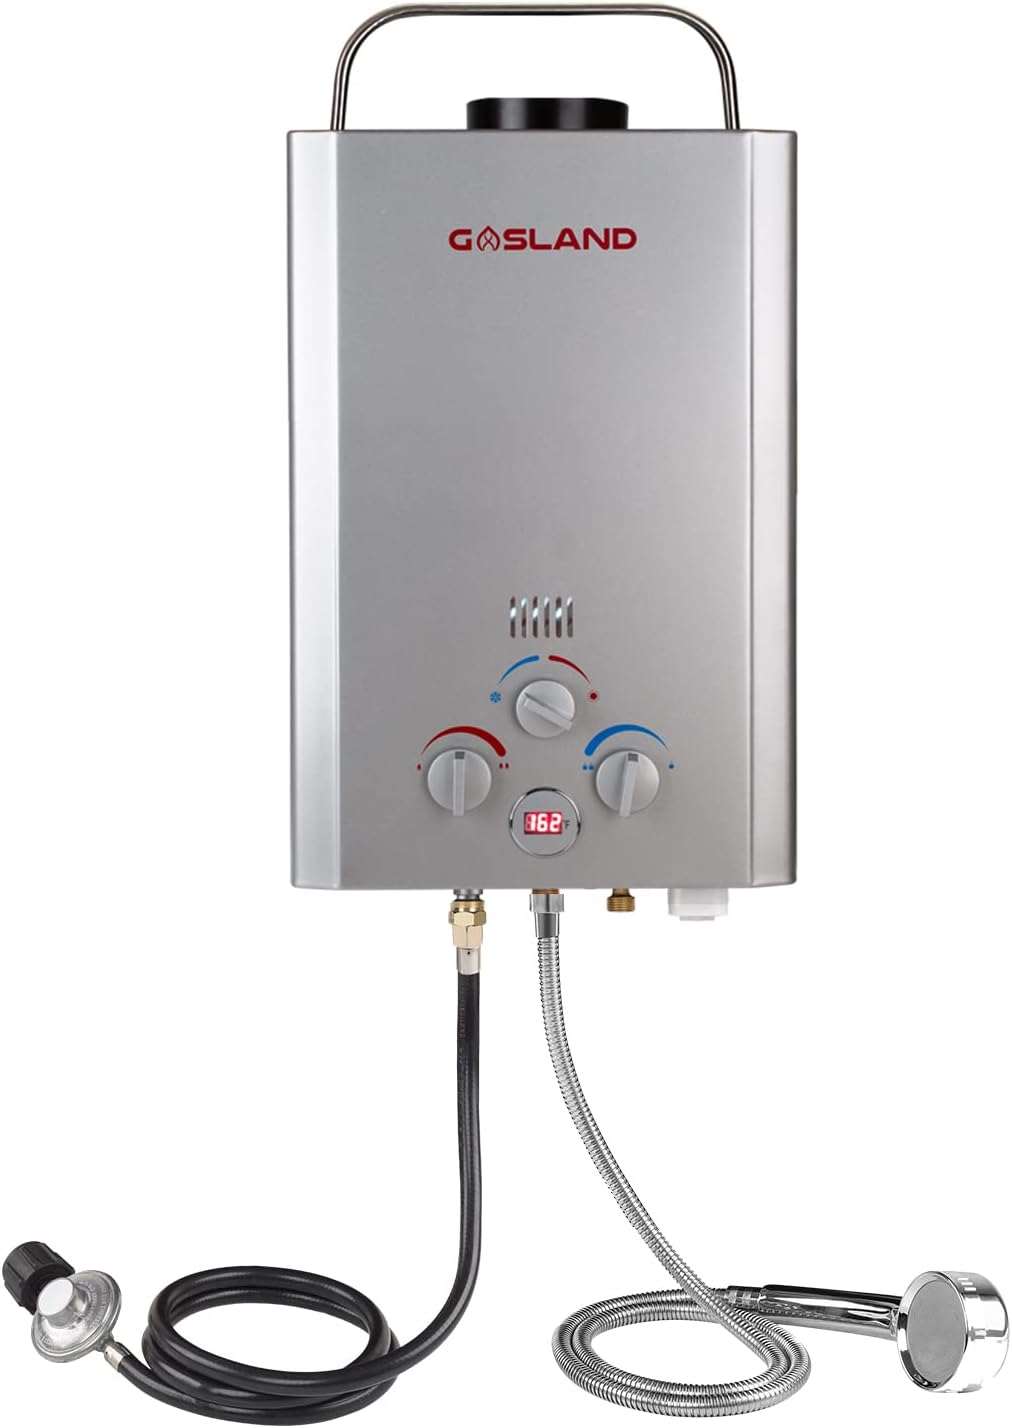 Tankless Water Heater, GASLAND Outdoors BE158S 1.58GPM 6L Portable Gas Water Heater, Propane Water Heater for RV Camping Cabin Barn Boat, Overheating Protection, Easy Installation - GASLAND Outdoors BE158S 6L Portable Gas Water Heater Review